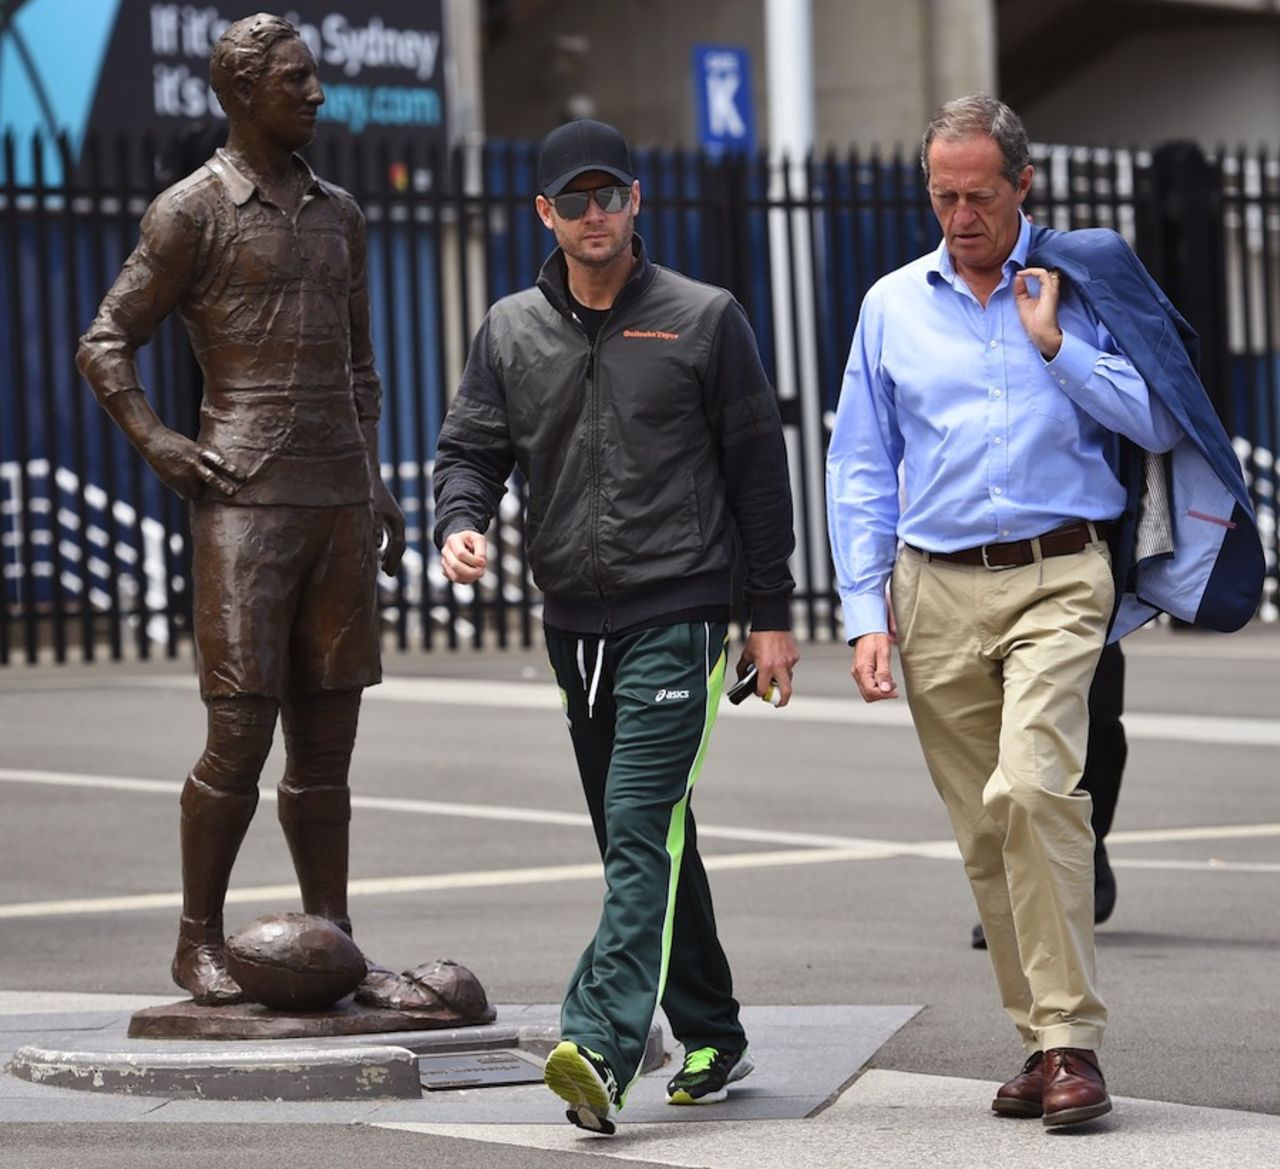 Michael Clarke and Cricket Australia doctor Peter Brukner at the SCG, the day after Phillip Hughes death, Sydney November 28, 2014